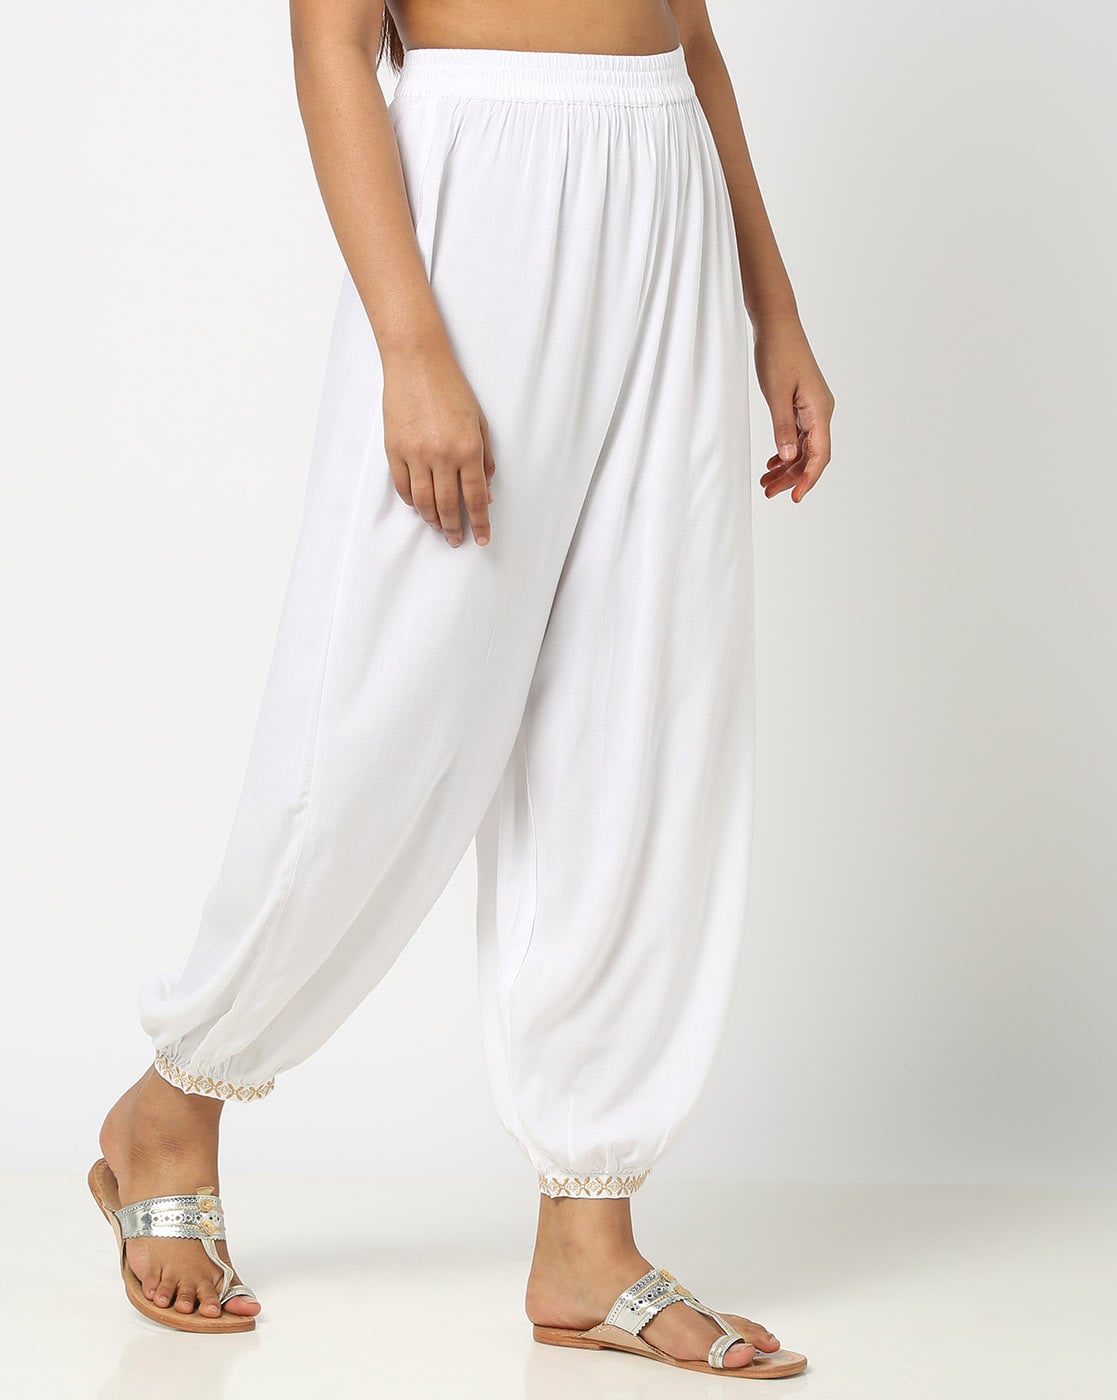 White Cotton Rayon Dhoti Harem Pants for Girls  Women  Zubix  Clothing  Accessories and Home Furnishing Shop Online